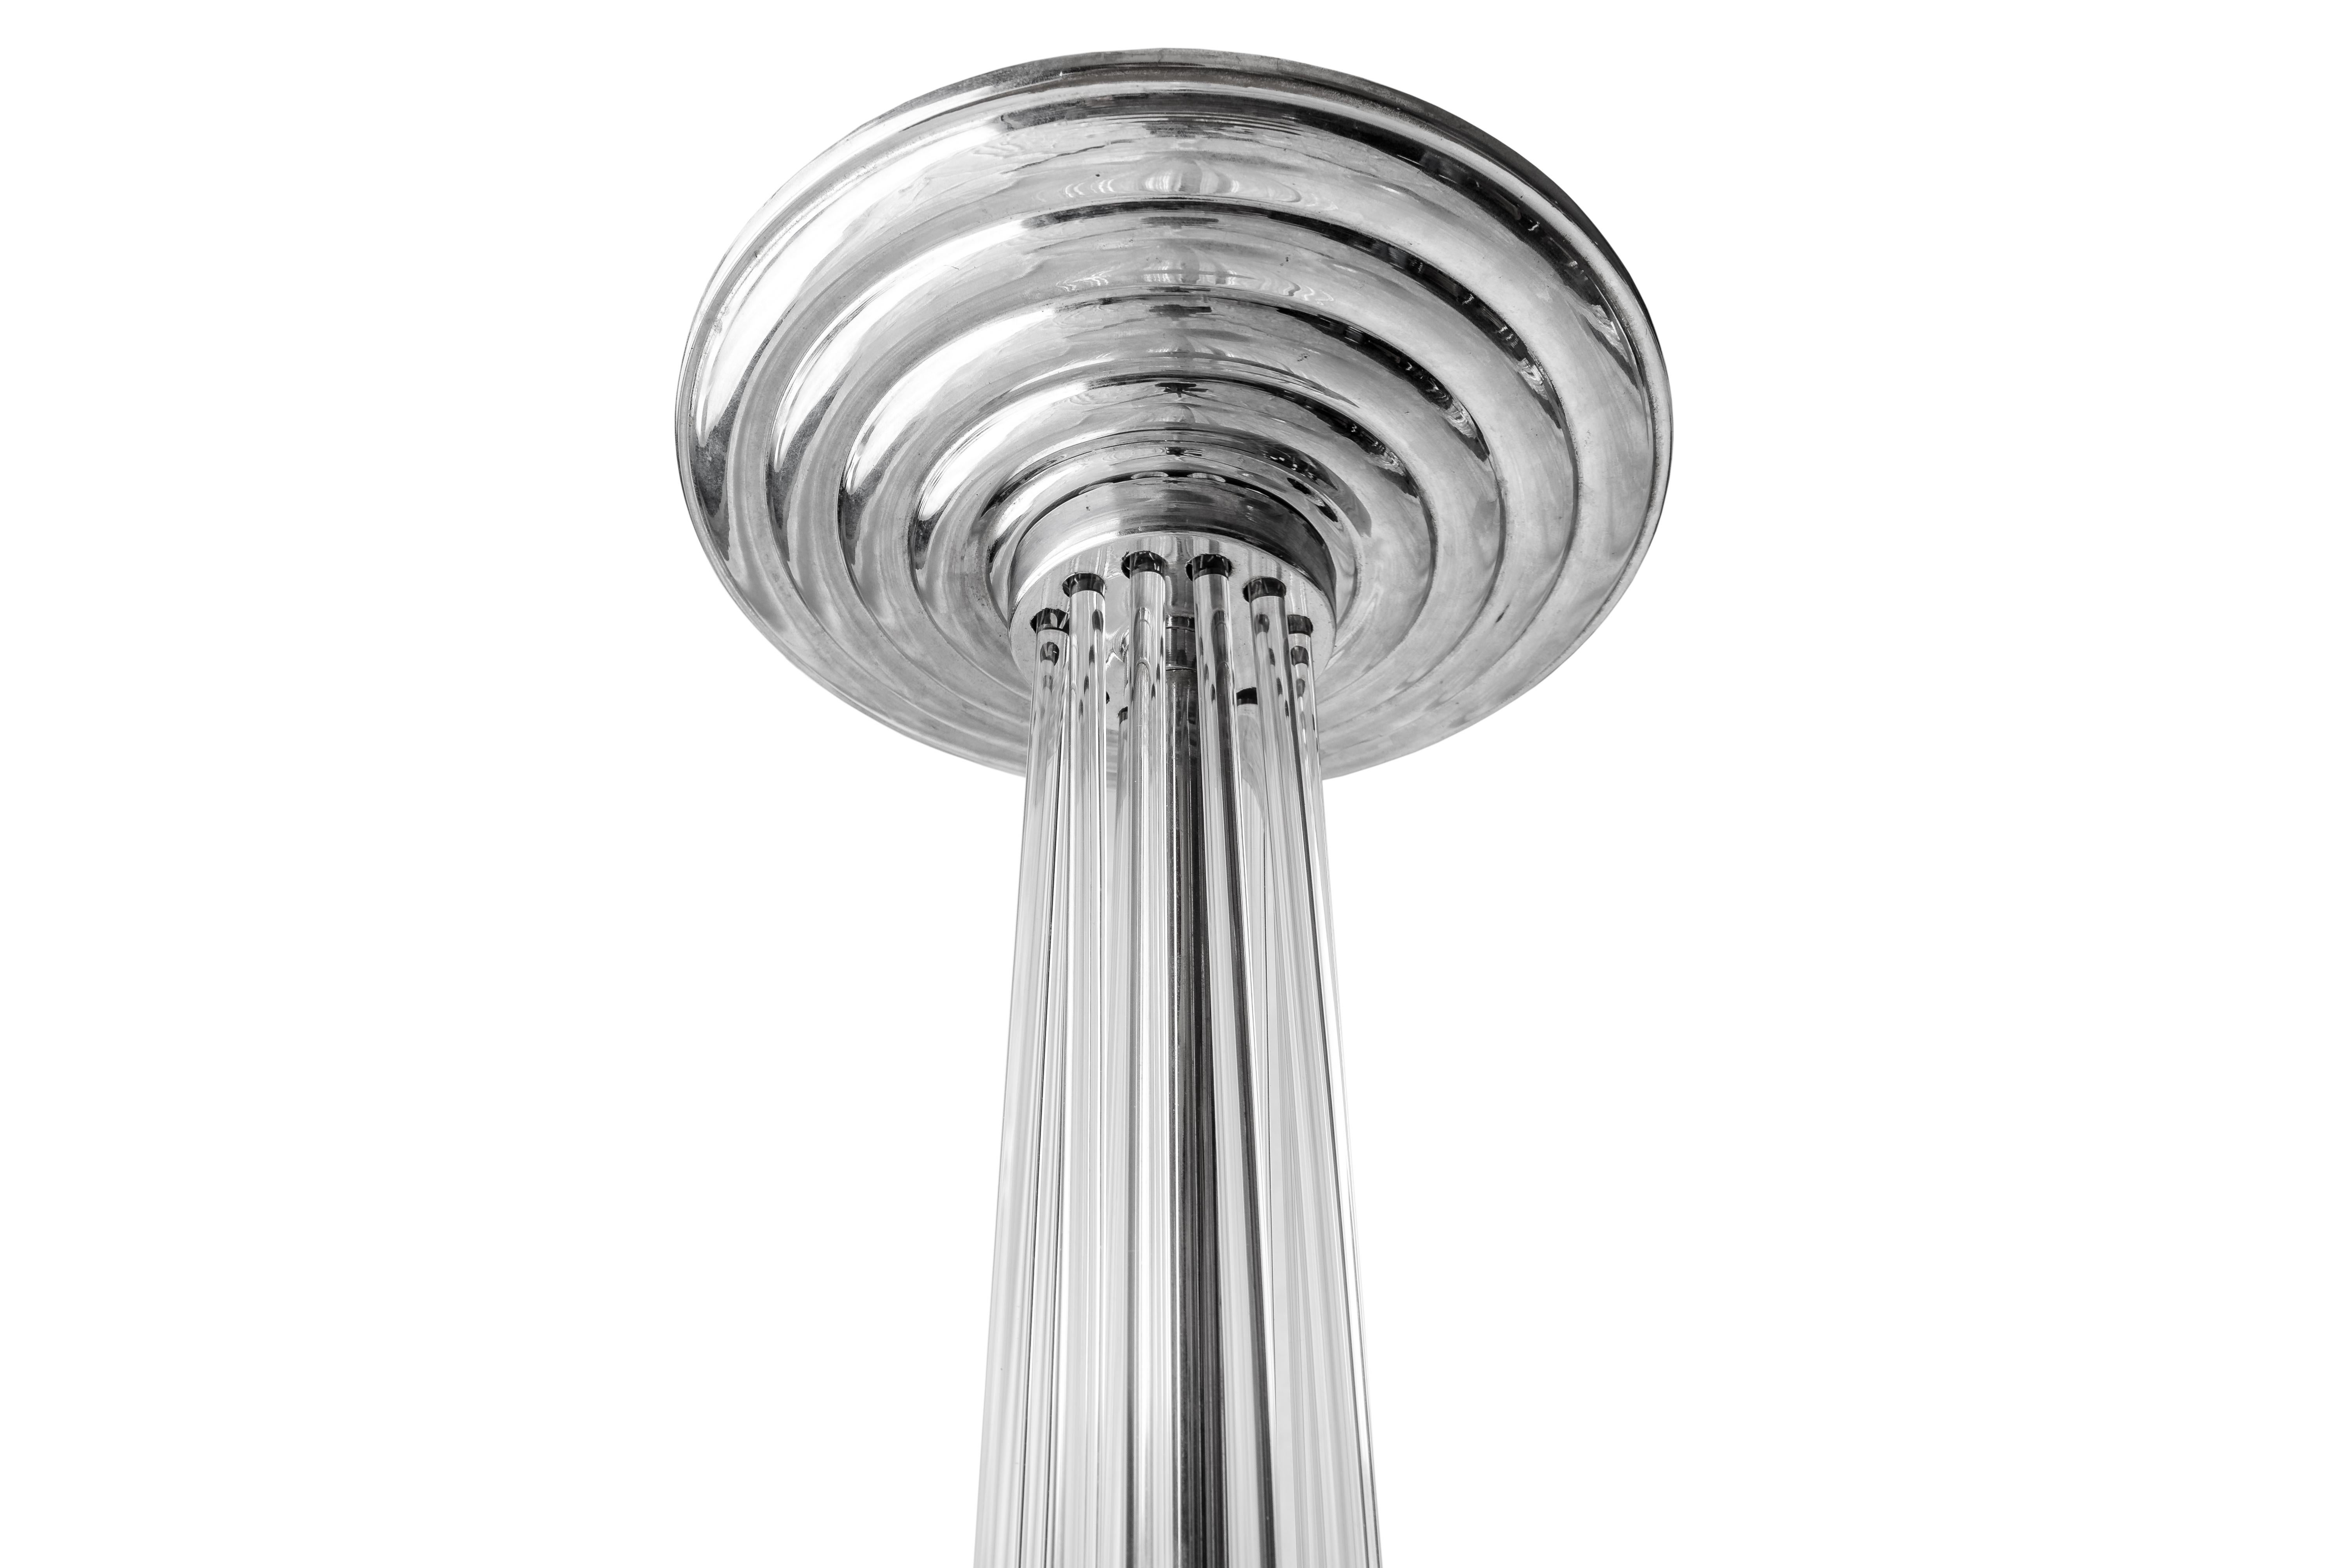 Pair of Art Deco Chrome and Acrylic Pedestals Stands Columns, 1930

Very elegant, rounded Art Deco Pedestal with plated base and top with black glass plate and acrylic rods. By spinning the top, the rods can be positioned in different angles. Its